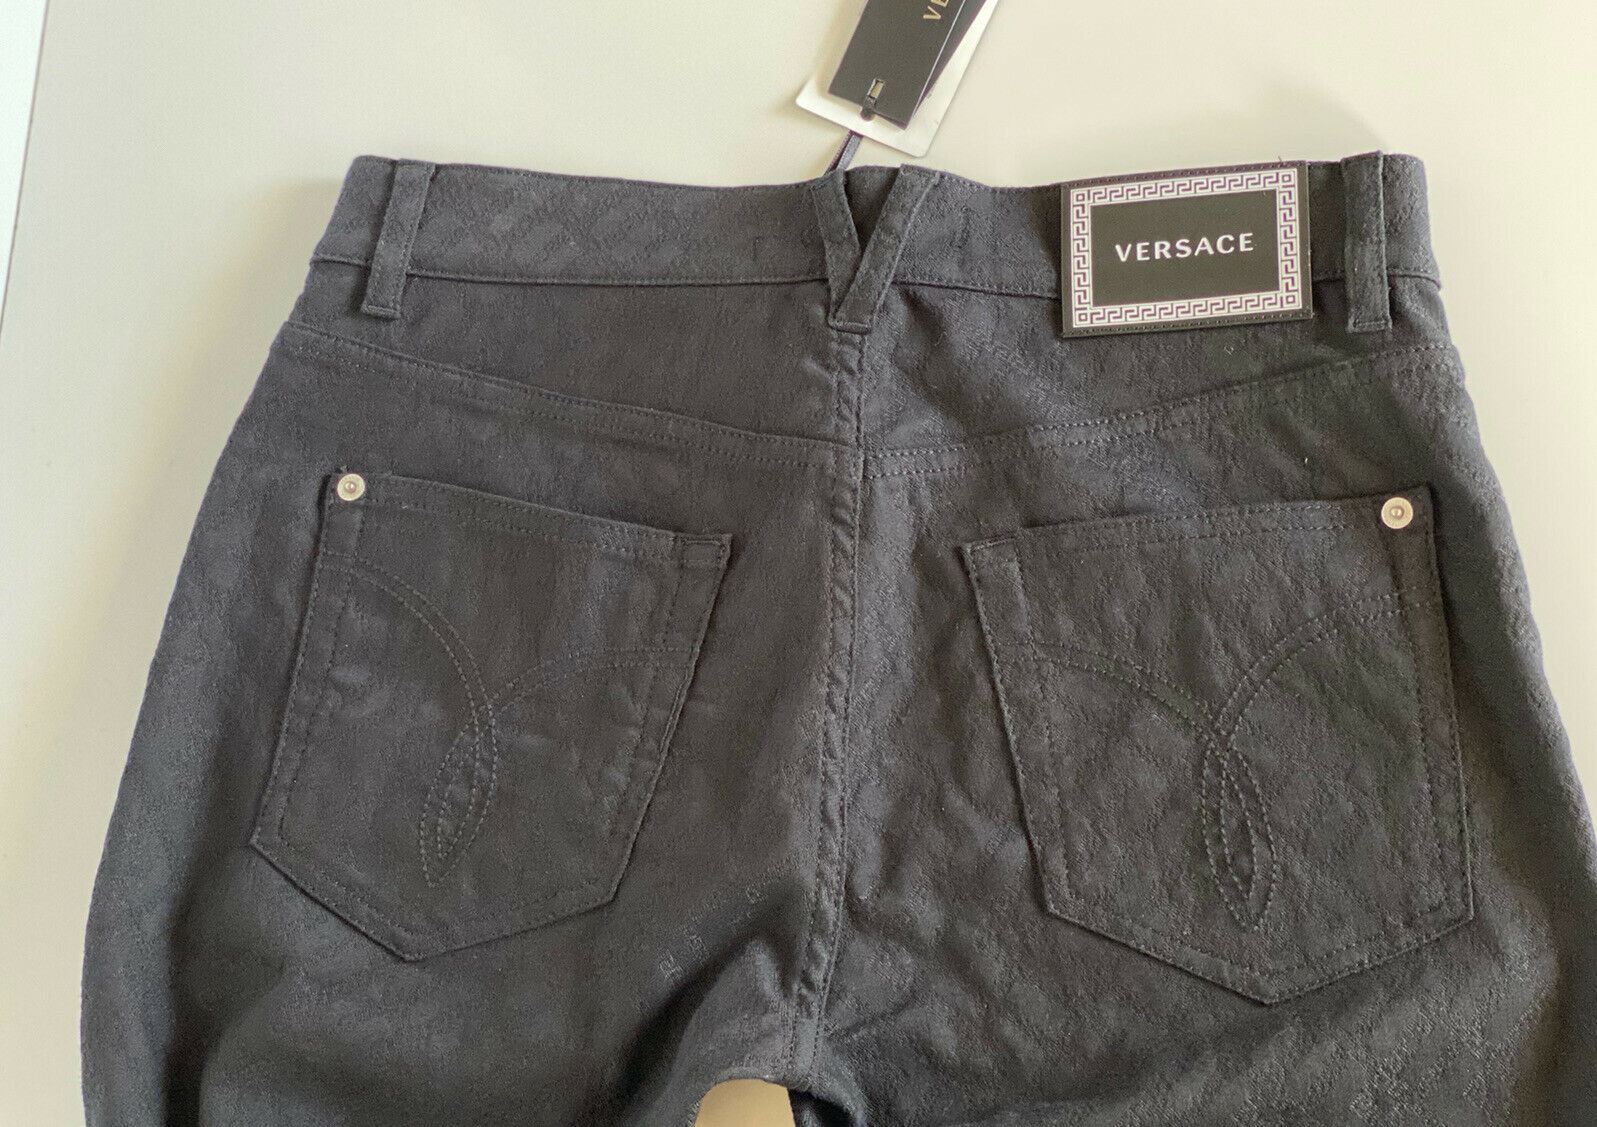 NWT $695 Versace Men's Denim Black Jeans Size 30 US A81832 Made in Italy